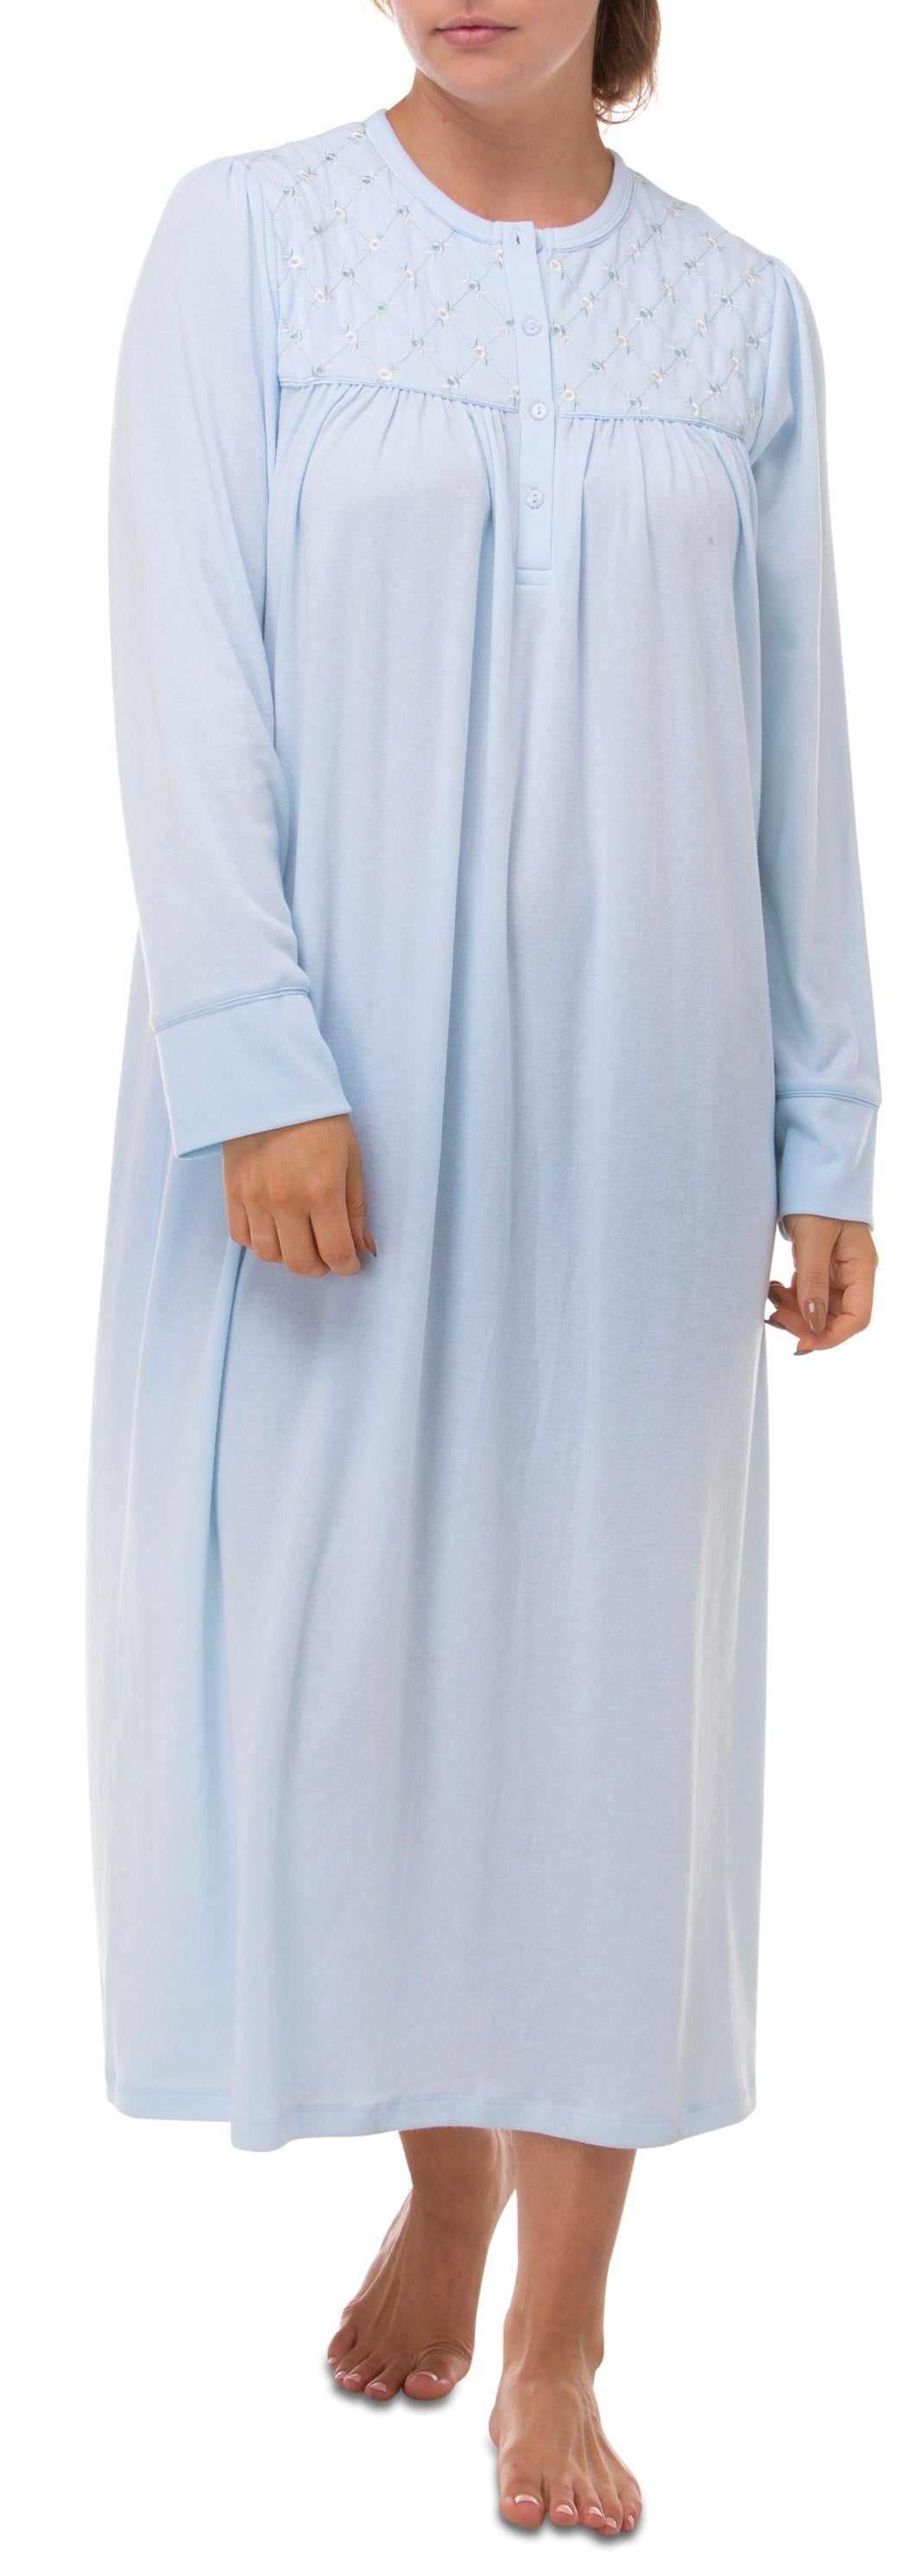 MARIE EMBROIDERED NIGHTIE PALE BLUE - SK033